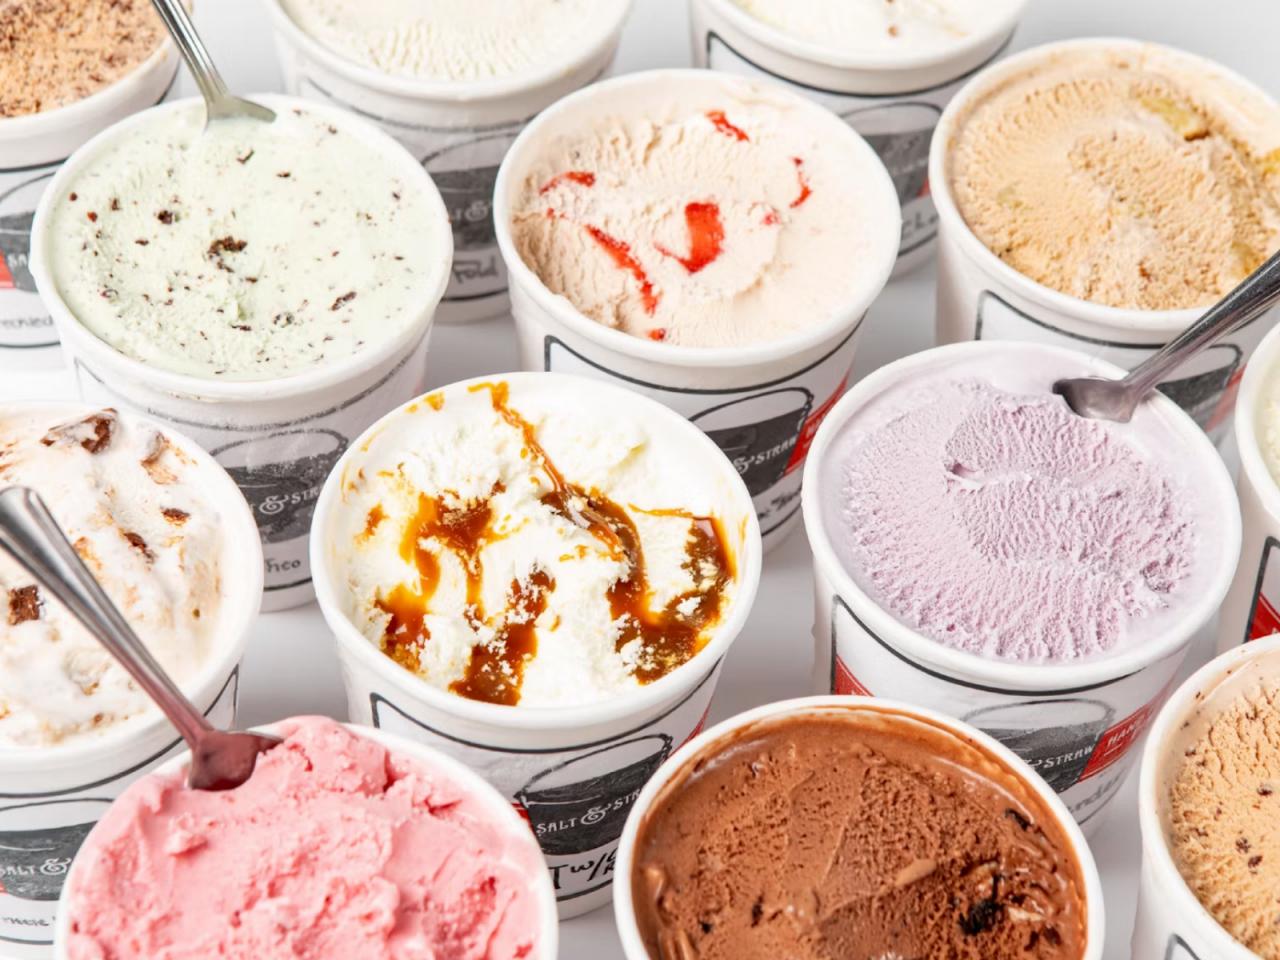 7 Of The BEST Ice Cream In Raleigh Shops The Locals Love!